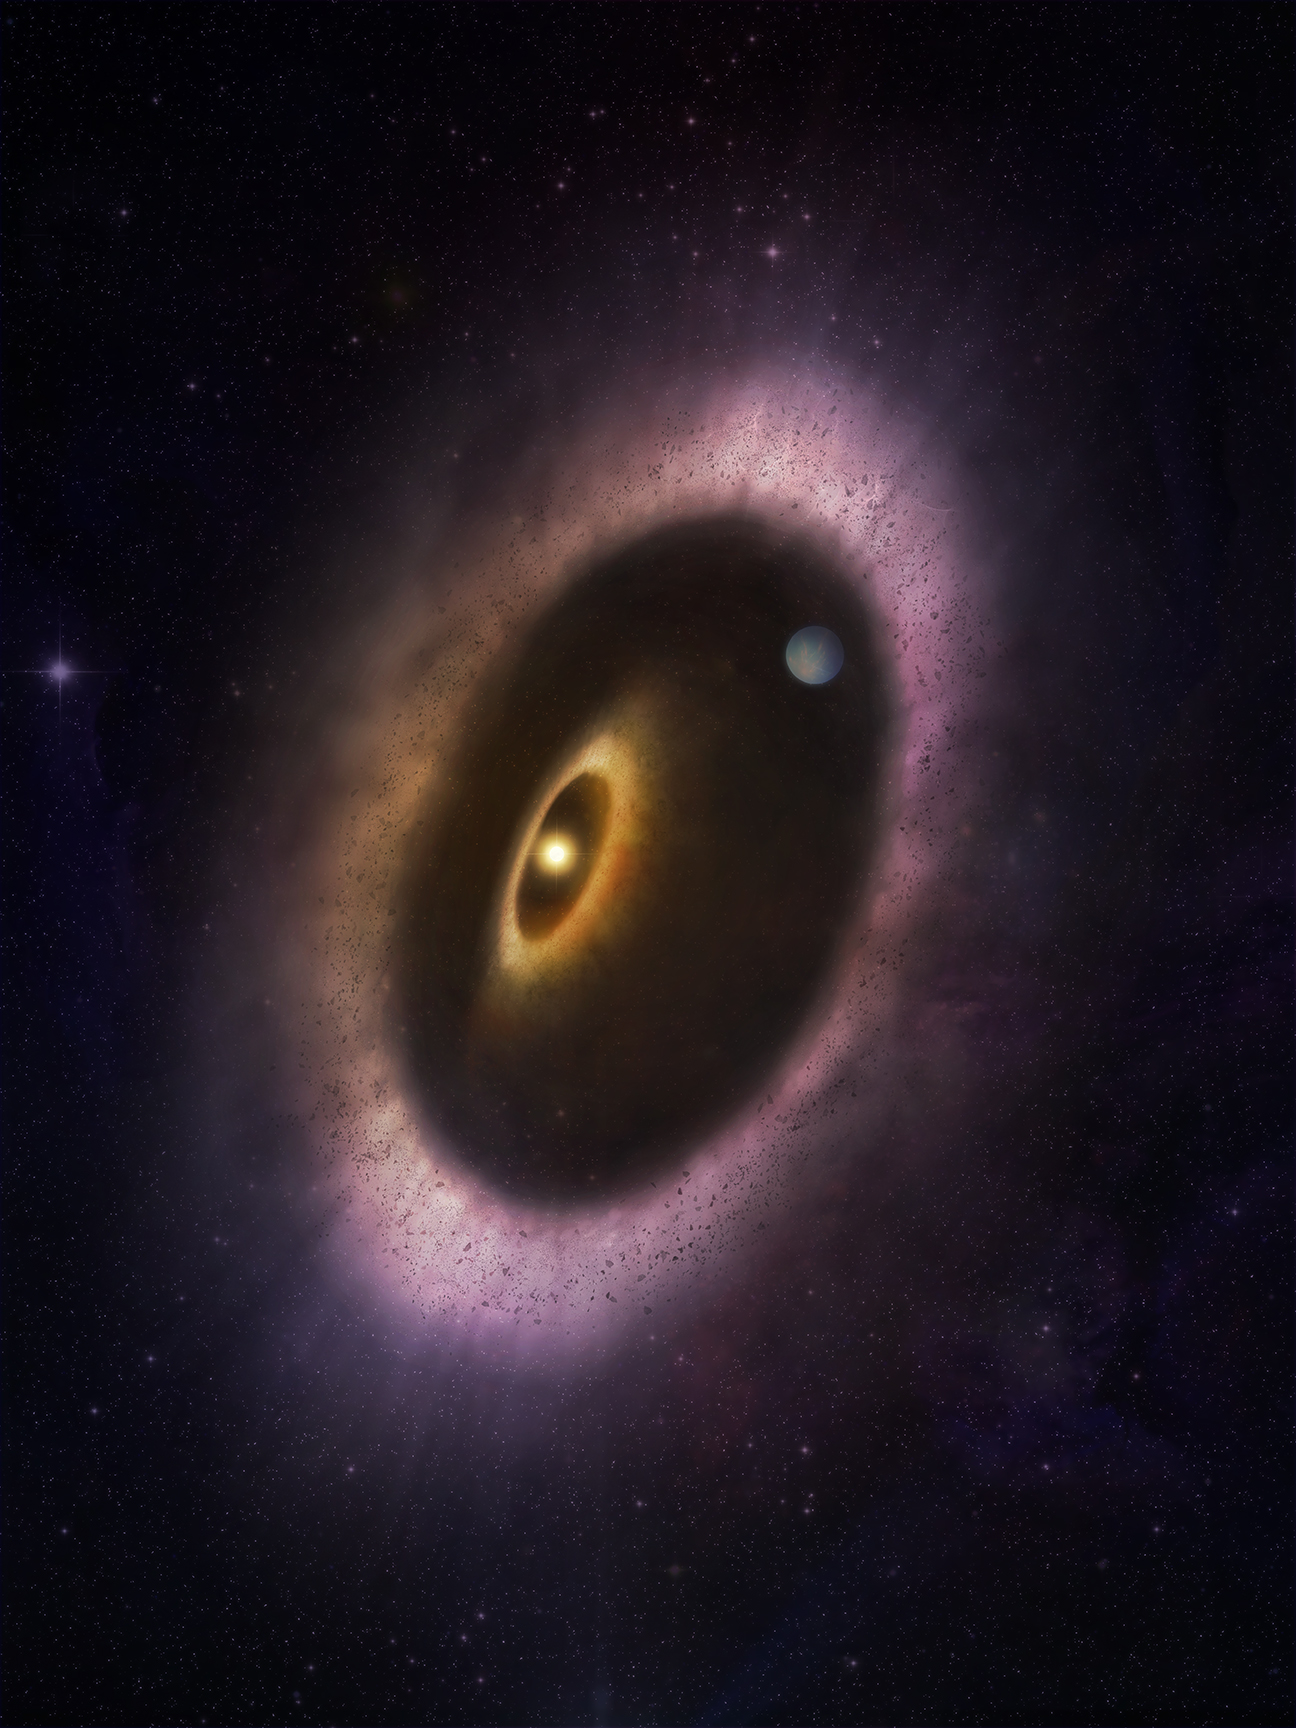 <p>Artist's impression of the billion-year-old Sun-like star, HD 53143, and its highly eccentric debris disk. The star and a second inner disk are shown near the southern foci of the elliptical debris disk. A planet, which scientists assume is shaping the disk through gravitational force, is shown to the north. Debris disks are the fossils of planetary formation. Since we can't directly study our disk— also known as the Kuiper Belt— scientists glean information about the formation of our Solar System by studying those we can see from a distance. Credit: ALMA (ESO/NAOJ/NRAO); M. Weiss (NRAO/AUI/NSF)</p>
